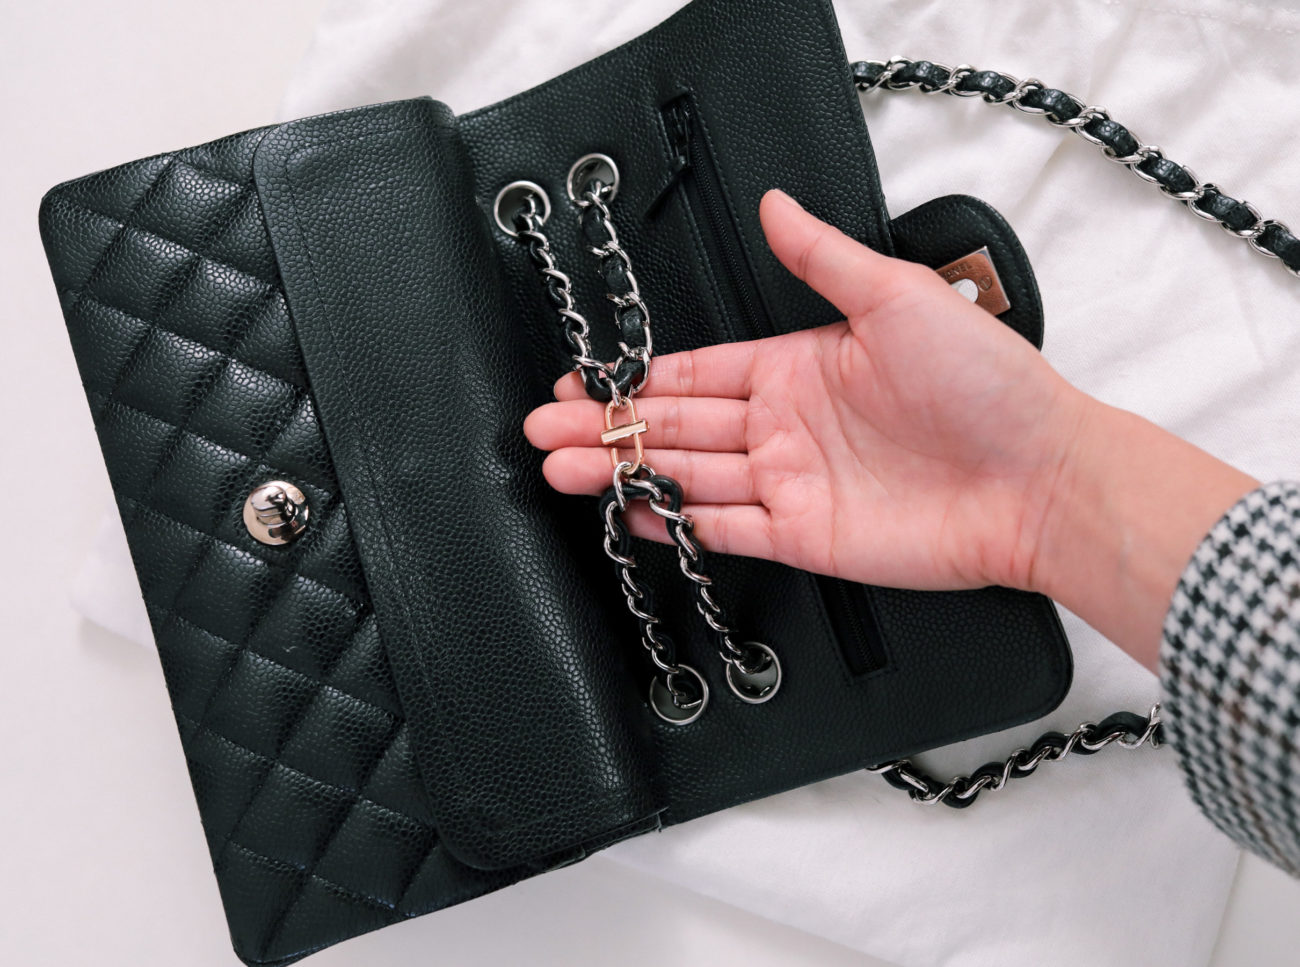 how to shorten a chanel bag chain strap